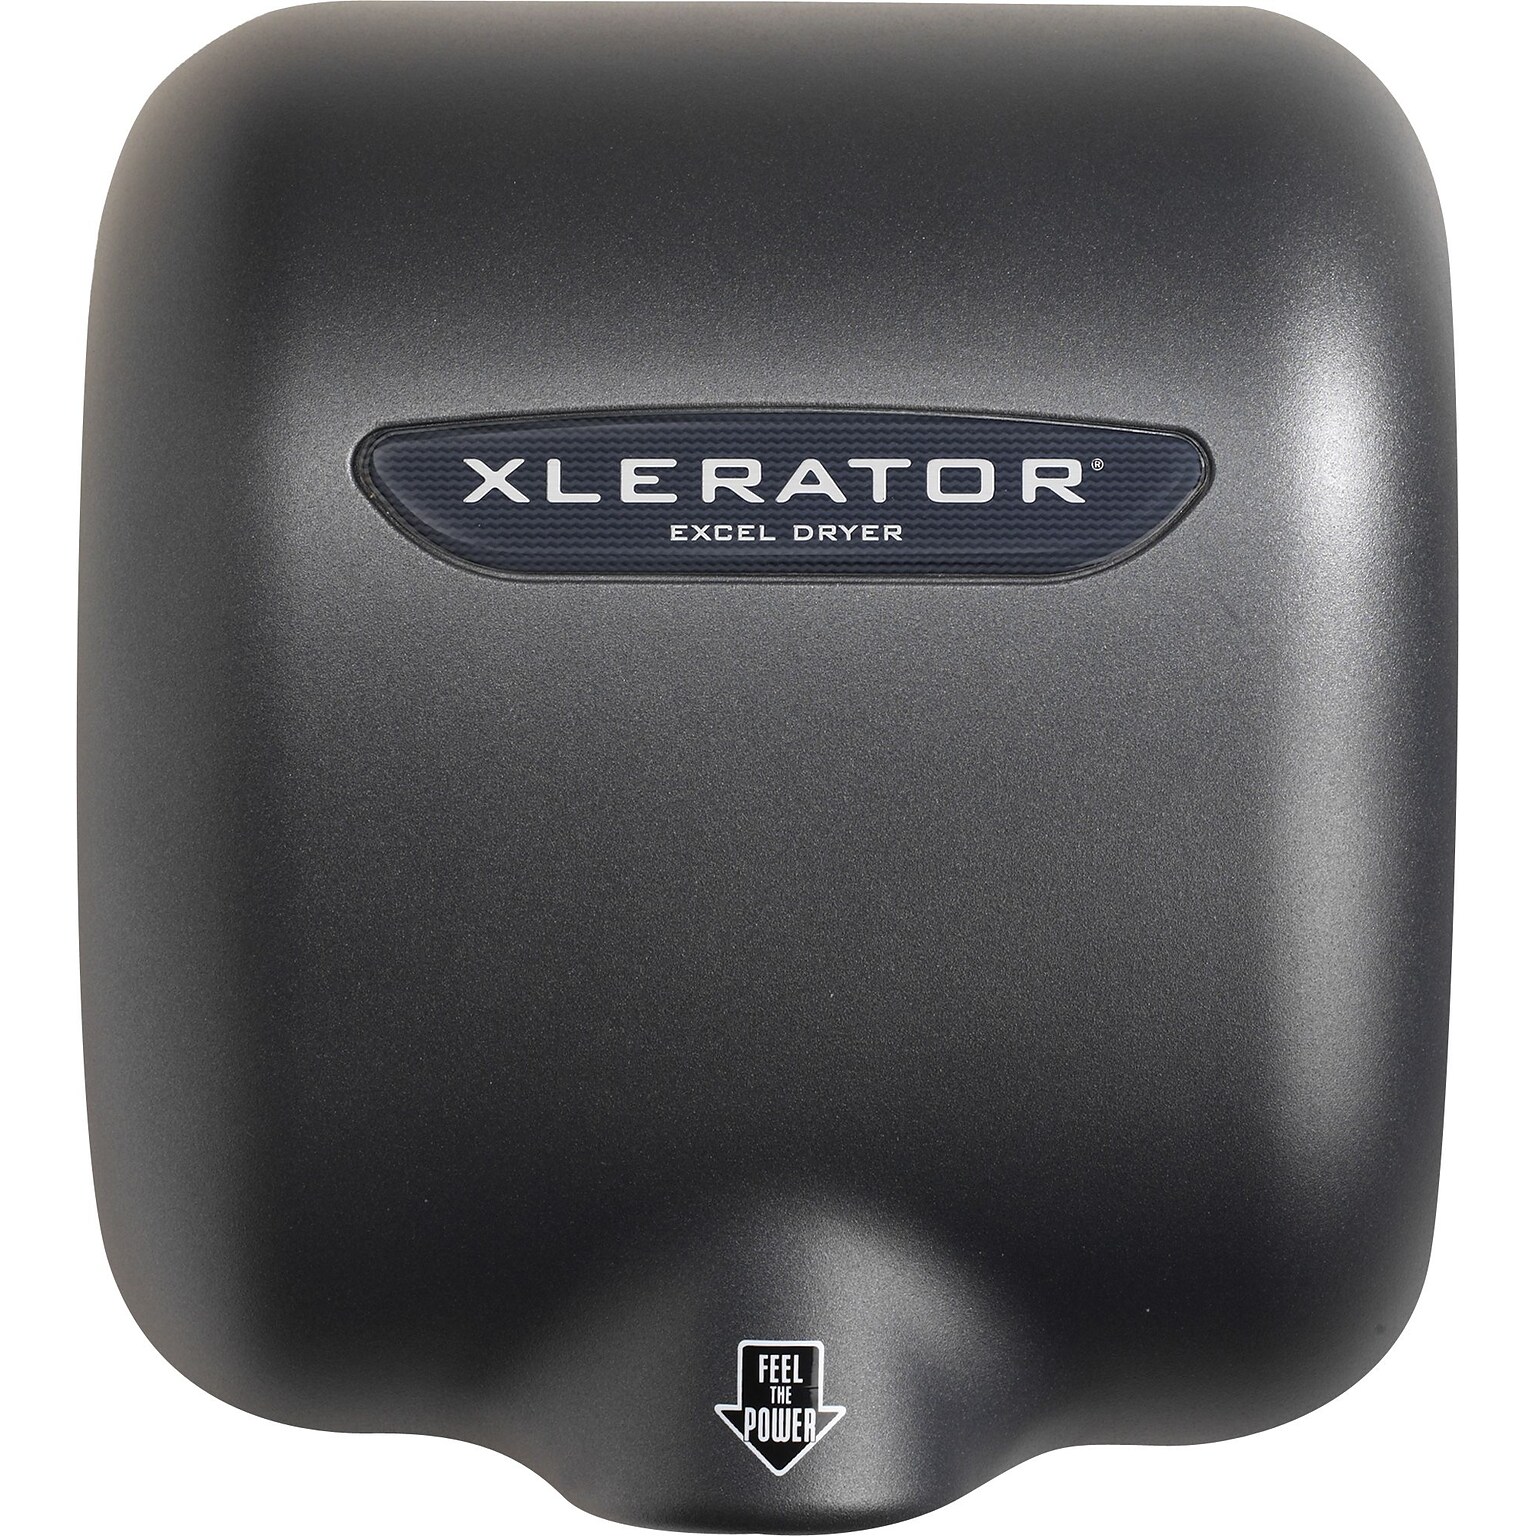 XLERATOR XL-GR 110-120V Hand Dryer with Noise Reduction Nozzle, Graphite Painted Cover